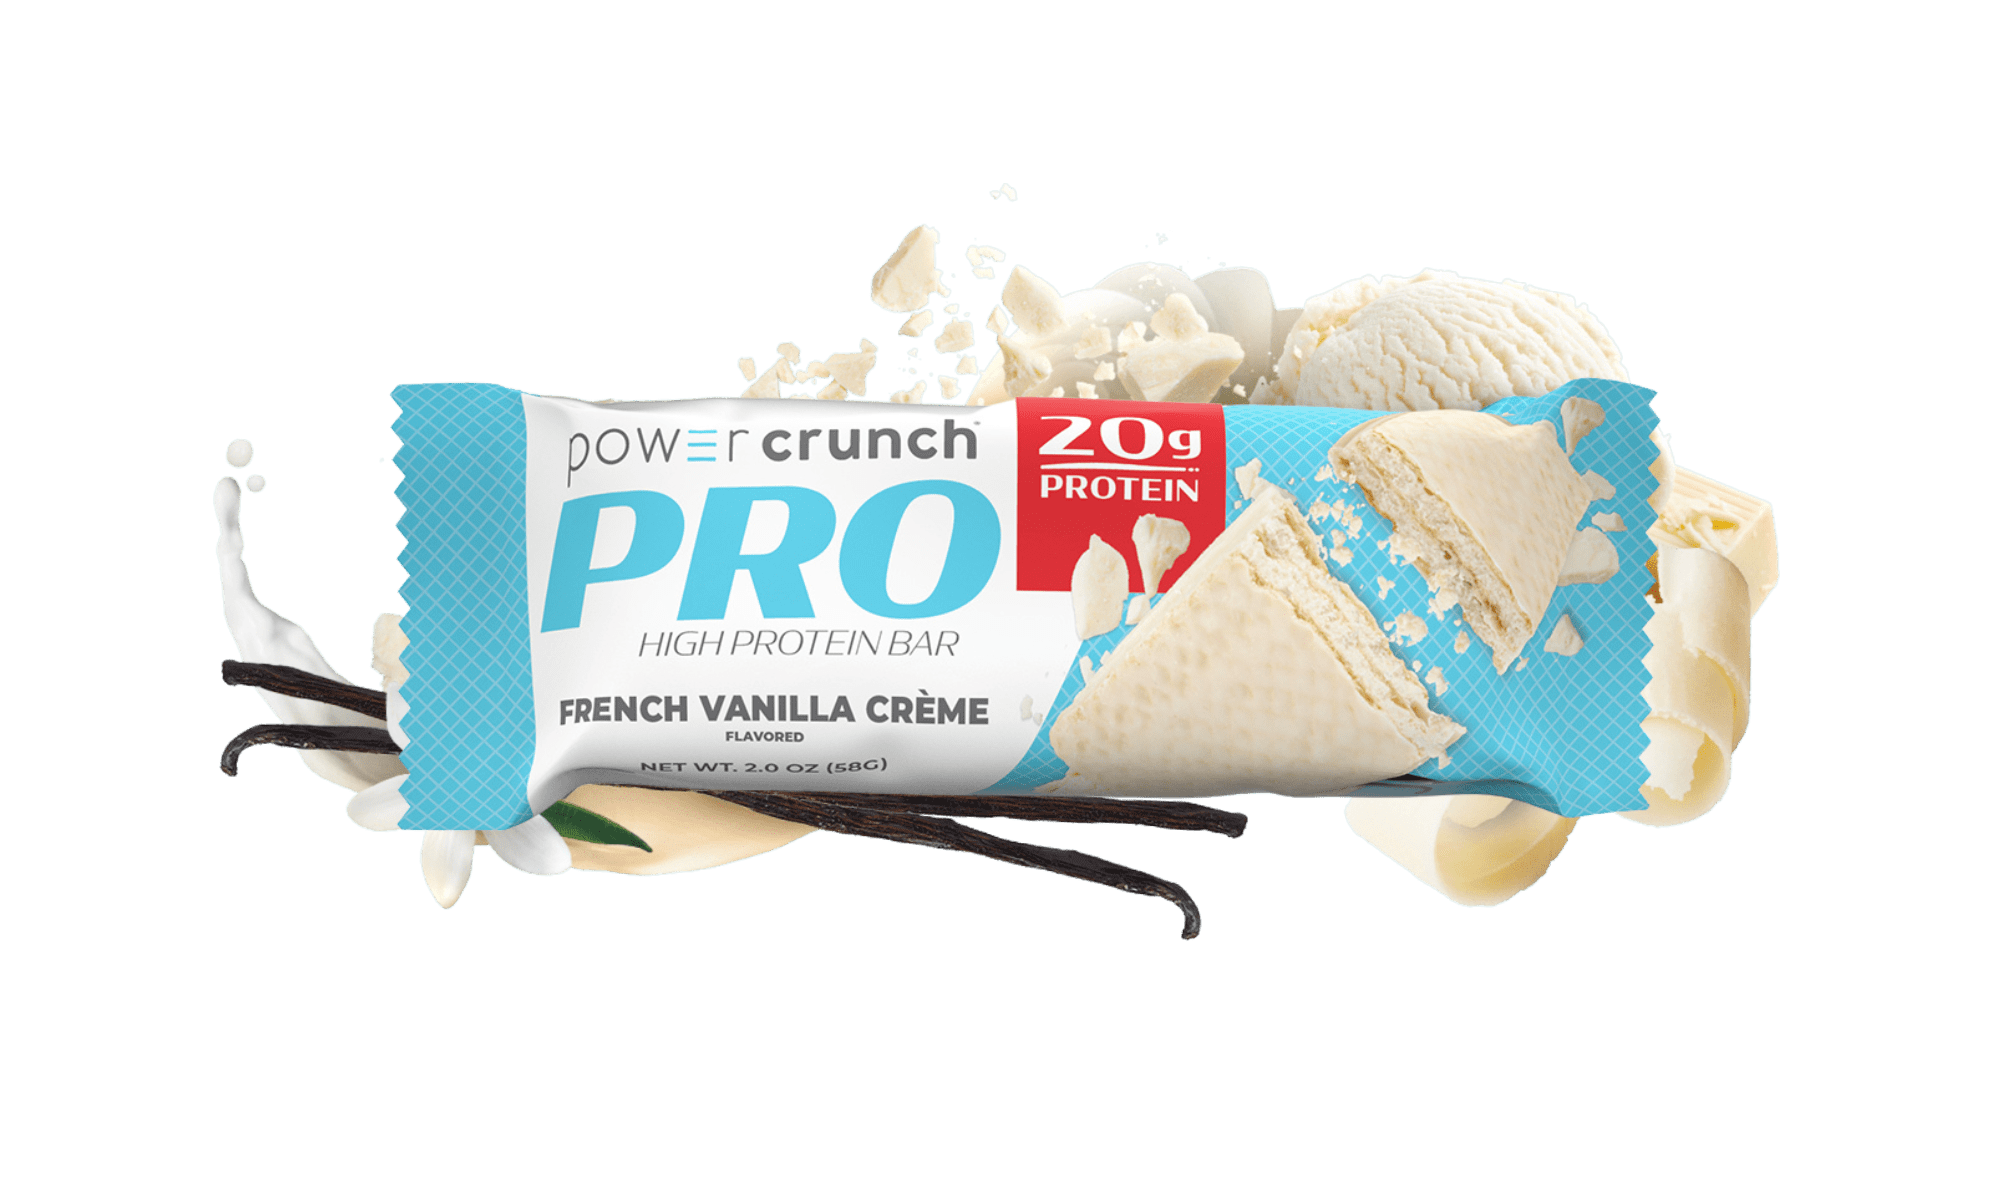 Power Crunch PRO French Vanilla 20g protein bars pictured with French Vanilla flavor explosion